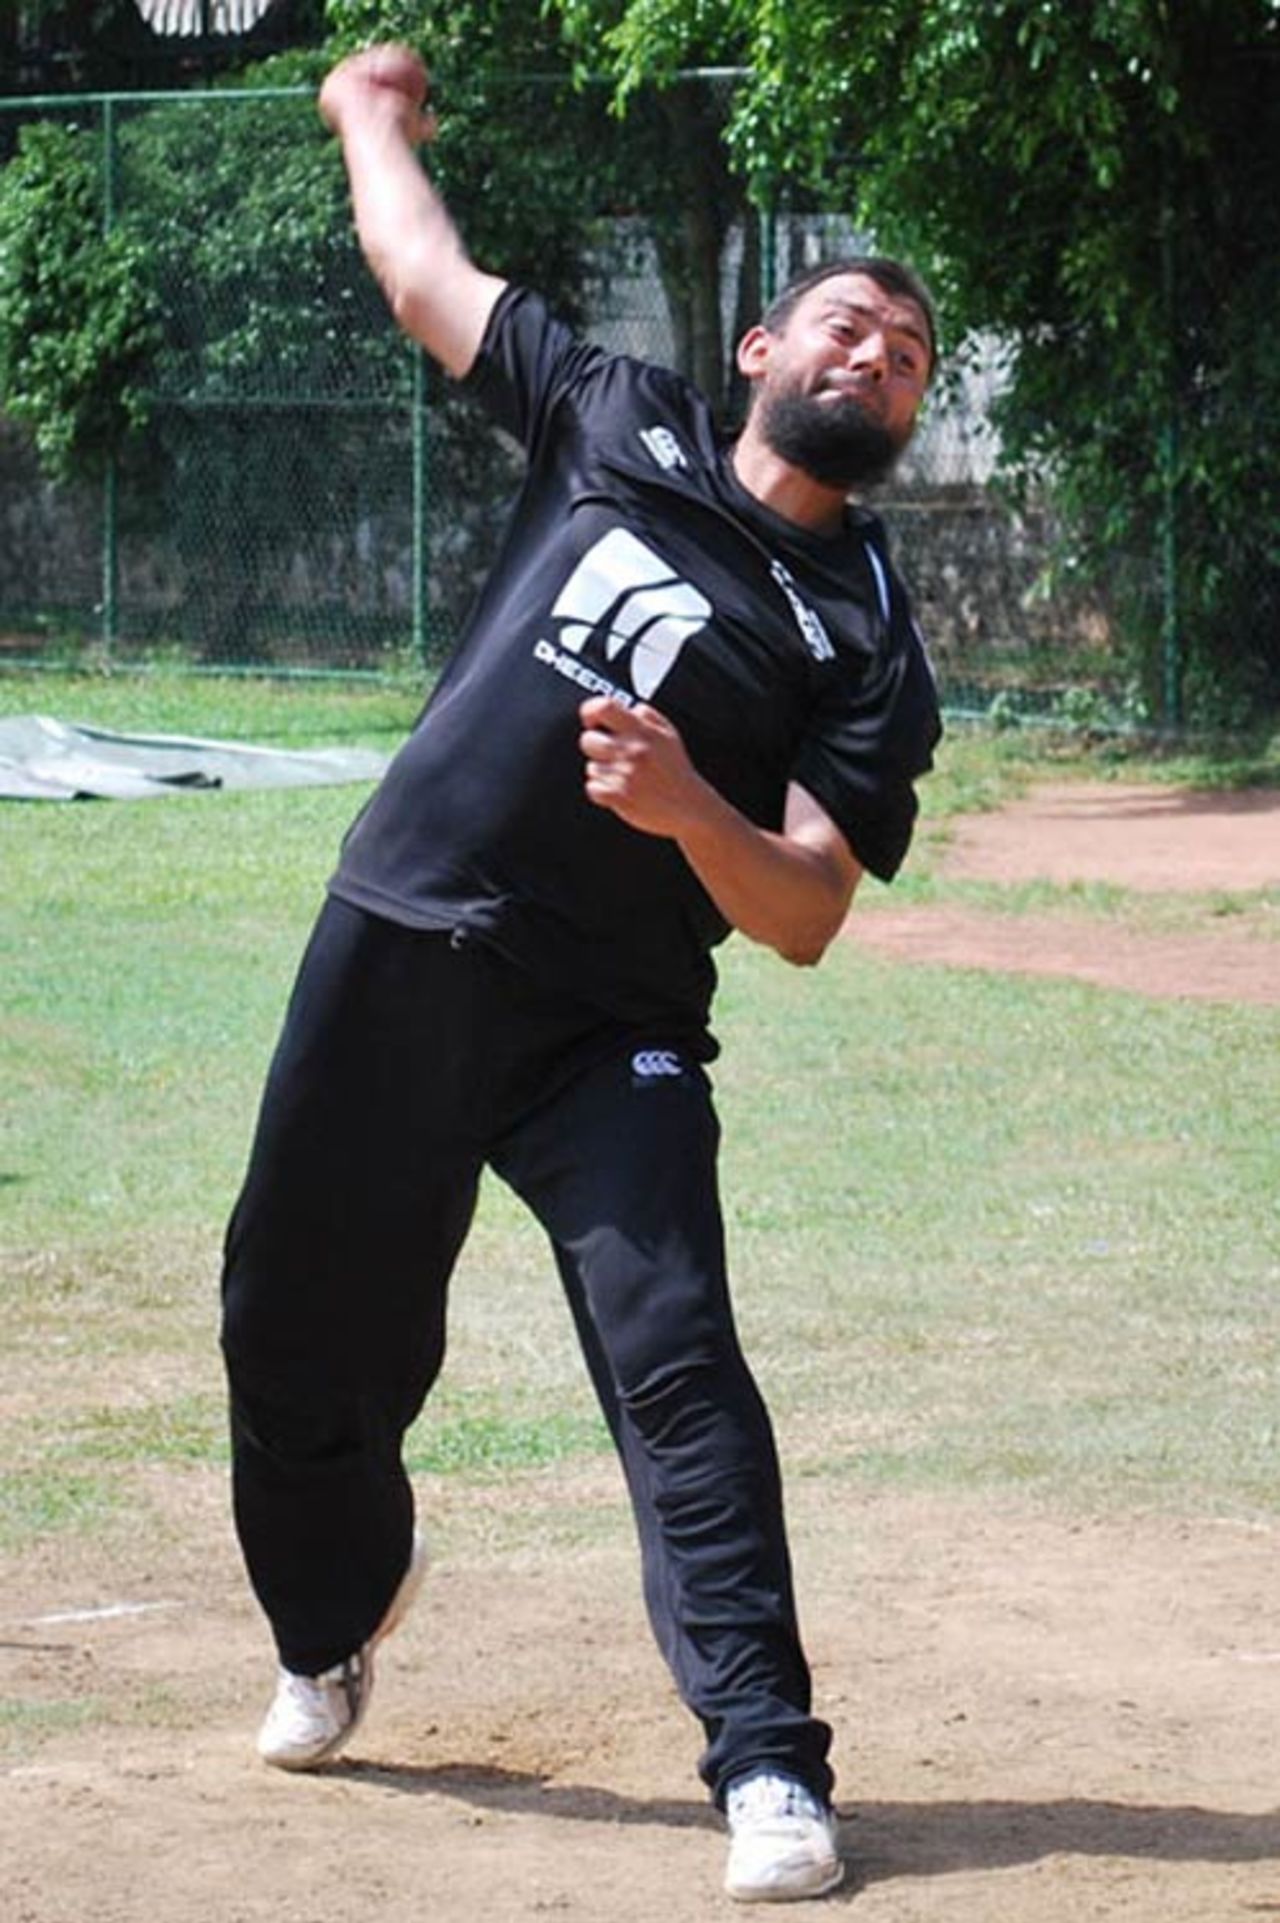 Saqlain Mushtaq in his delivery stride, Colts cricket ground, Colombo, August 8, 2009